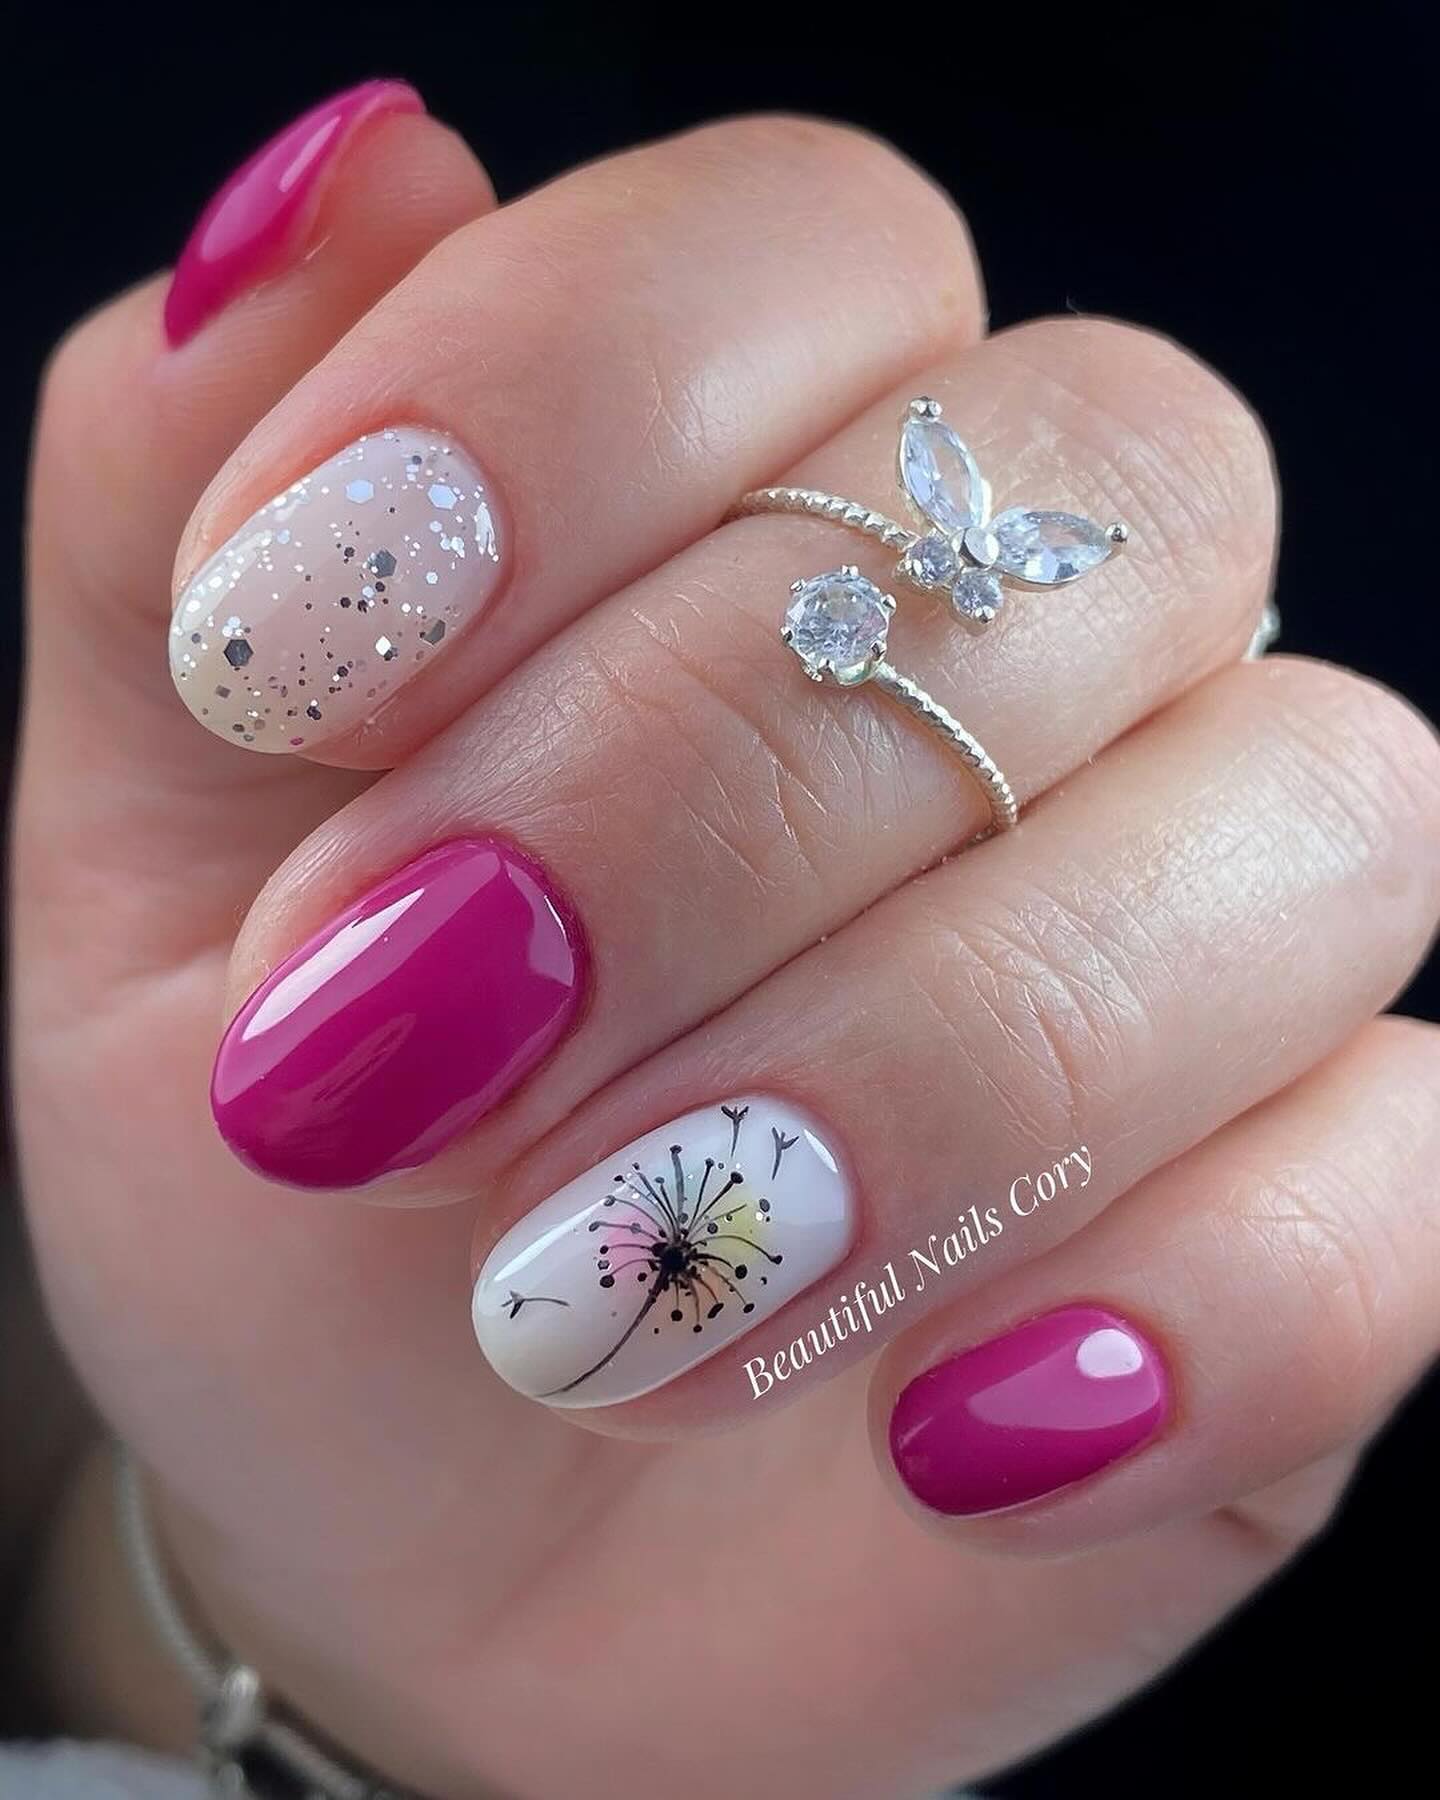 100 Pretty Spring Nail Designs To Try This Year images 97